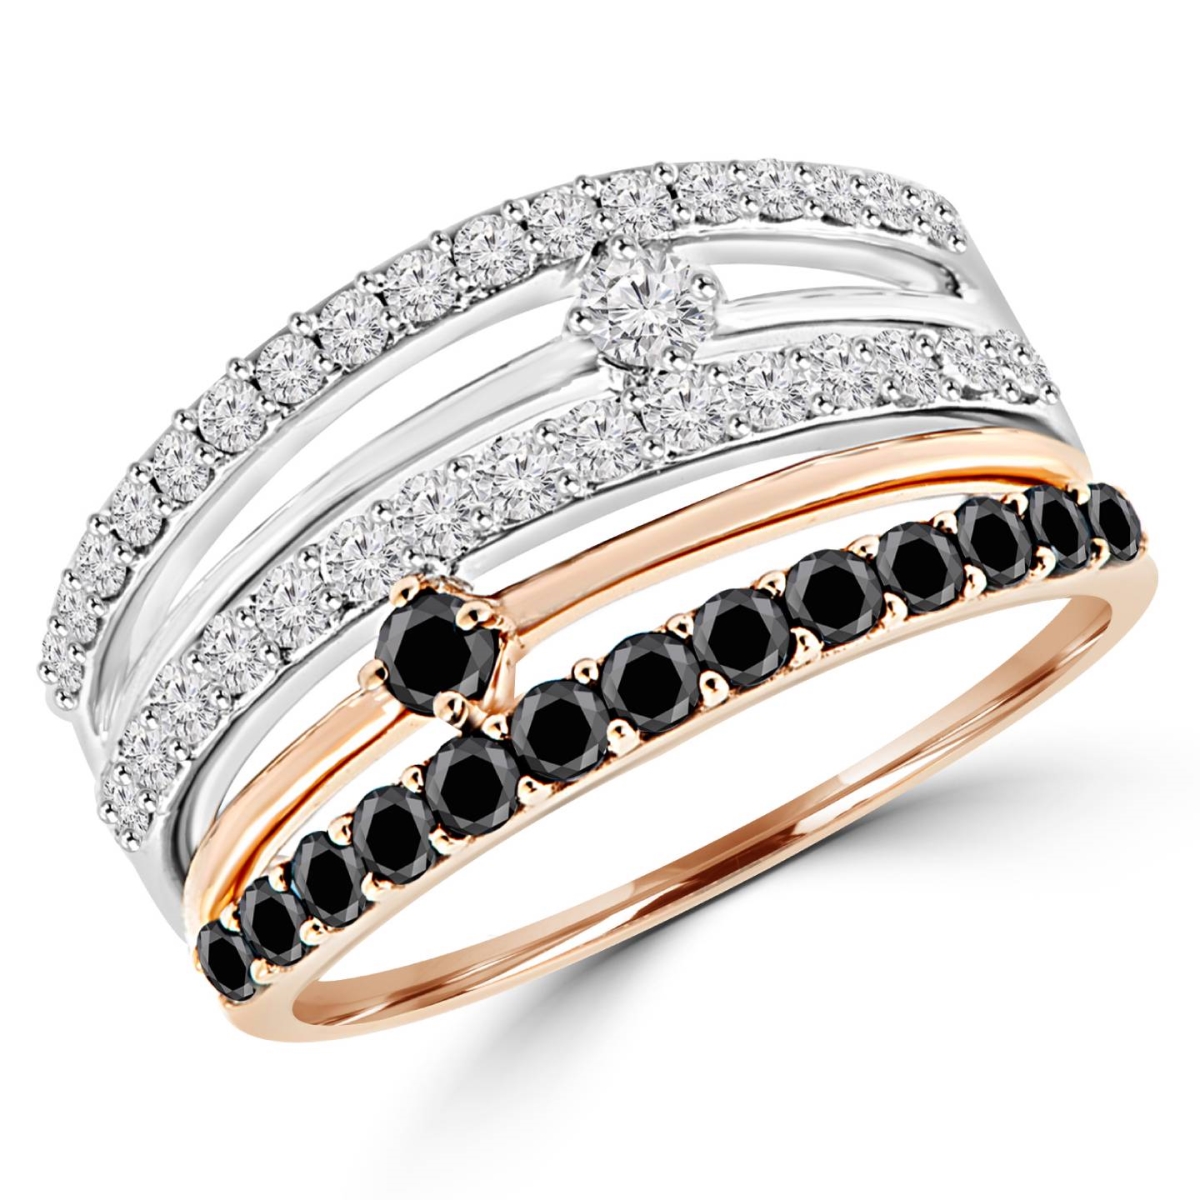 Picture of Majesty Diamonds MDR140001-3.5 0.8 CTW 5-row Black & White Diamond Fashion Cocktail Ring in 14K White & Rose Gold - Size 3.5